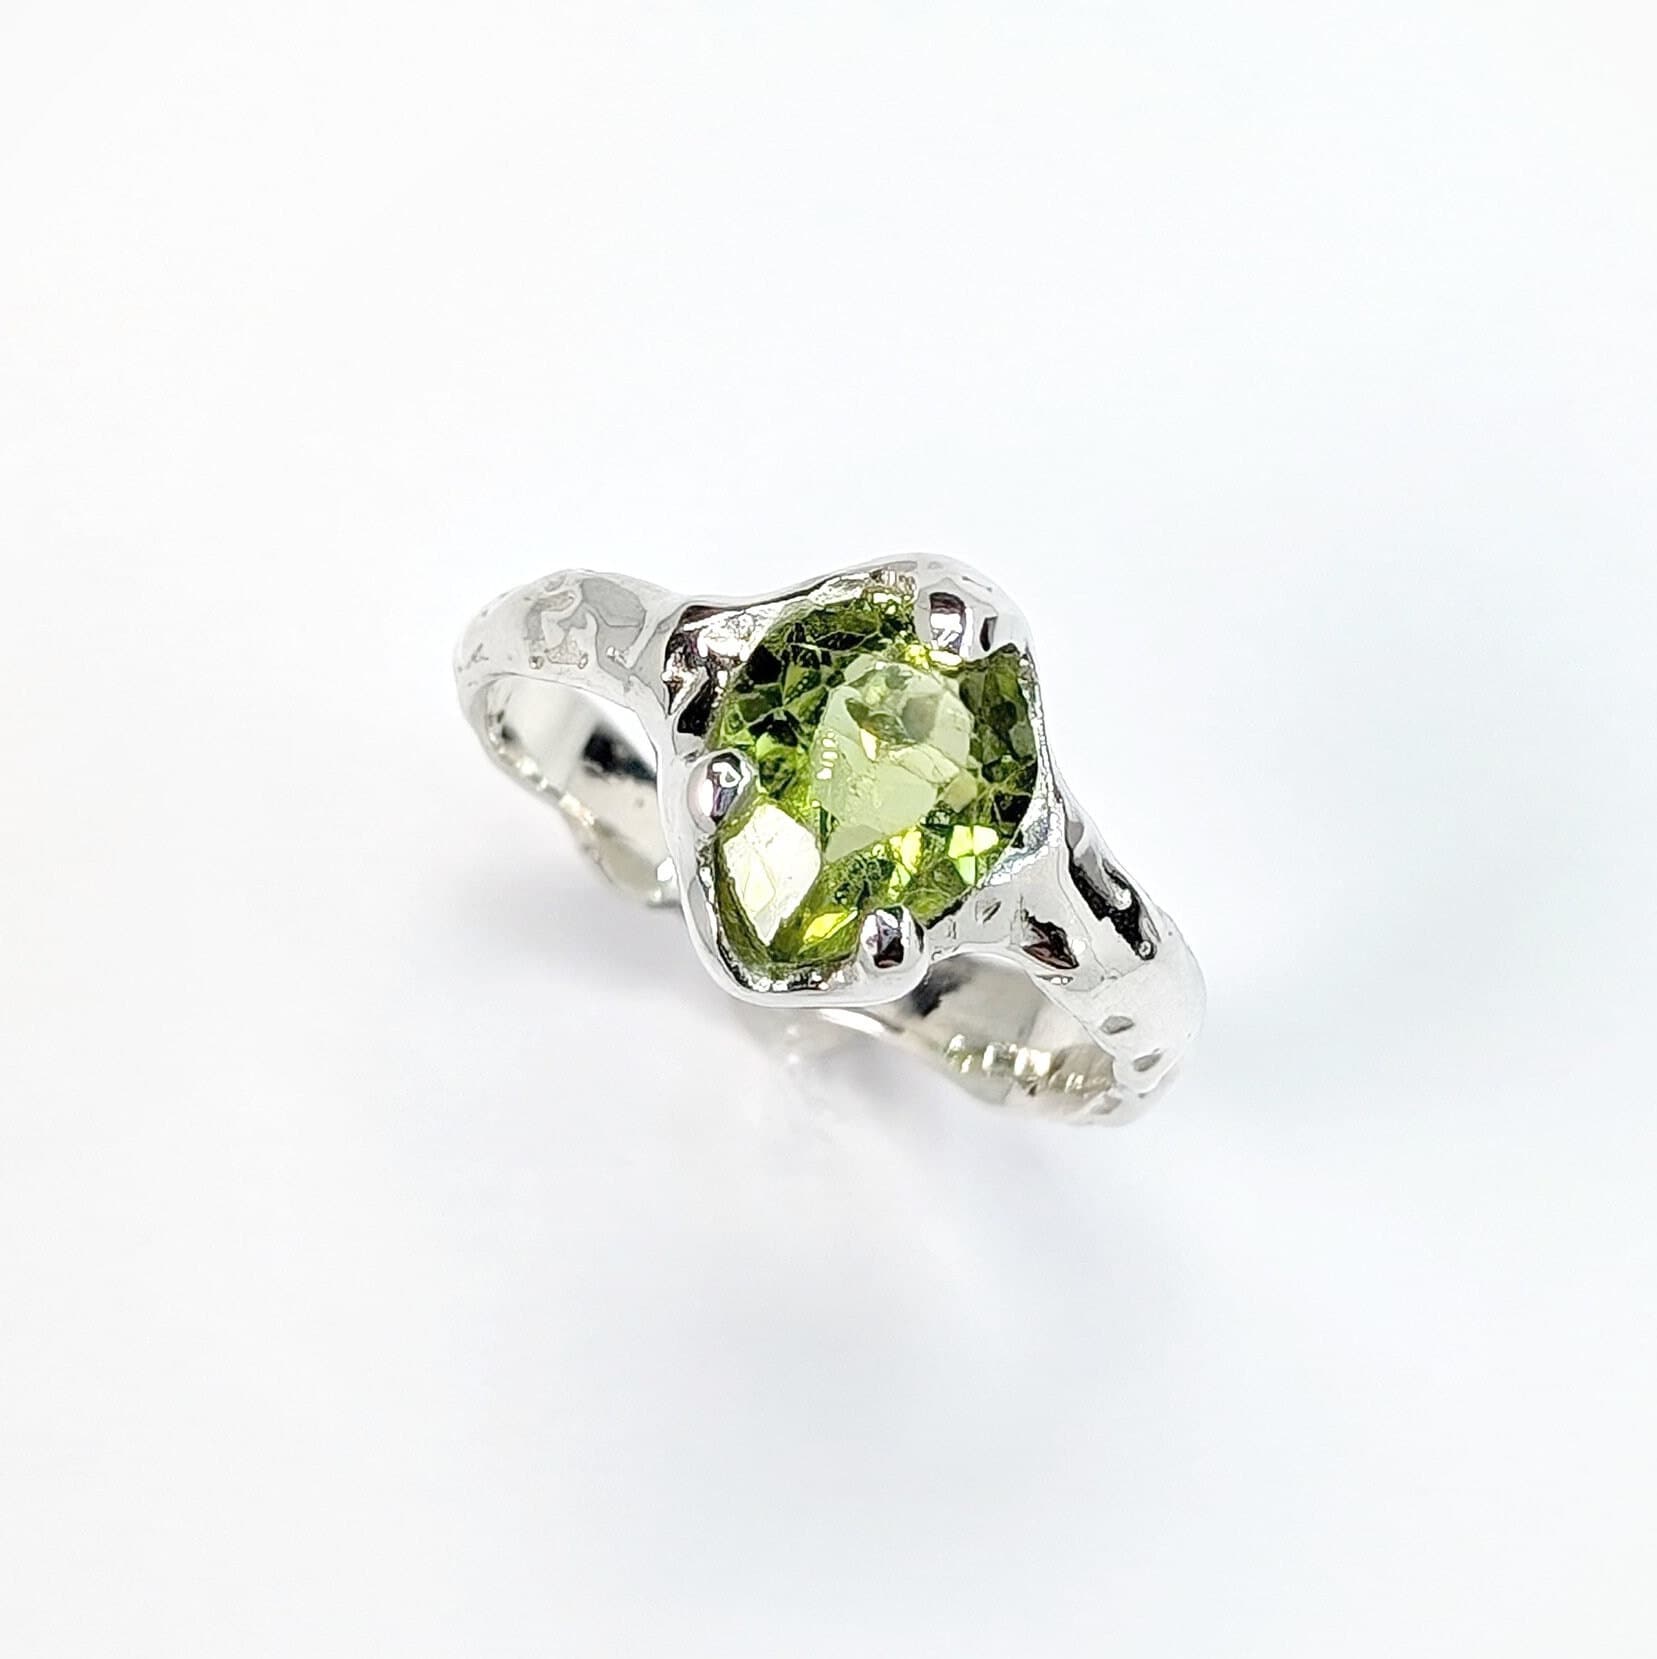 Pear shape Peridot set on a Molten Silver textured band